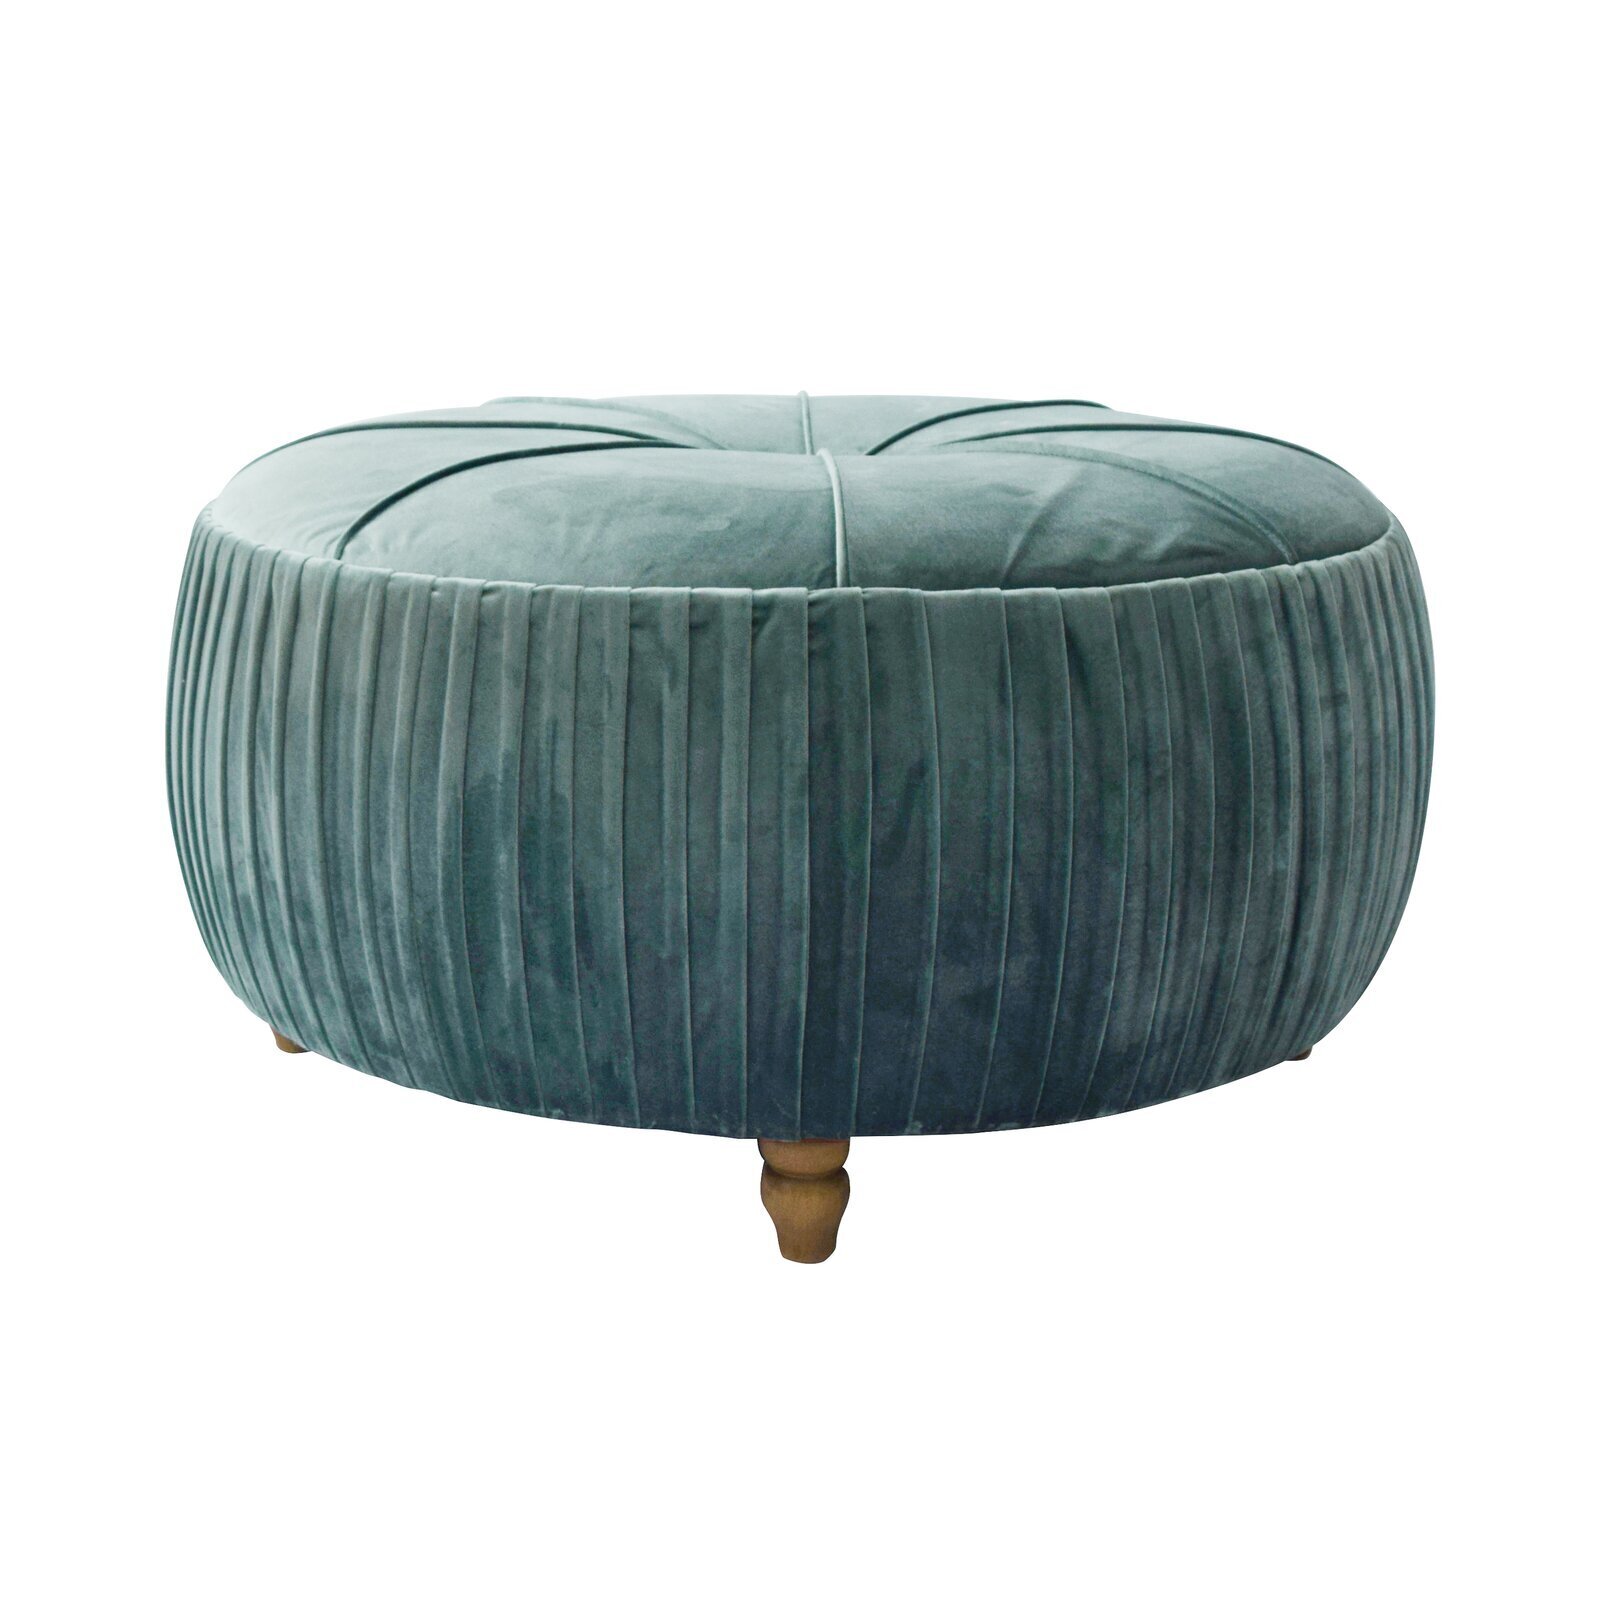 Boho Chic Round Dressing Room Ottoman With Feet